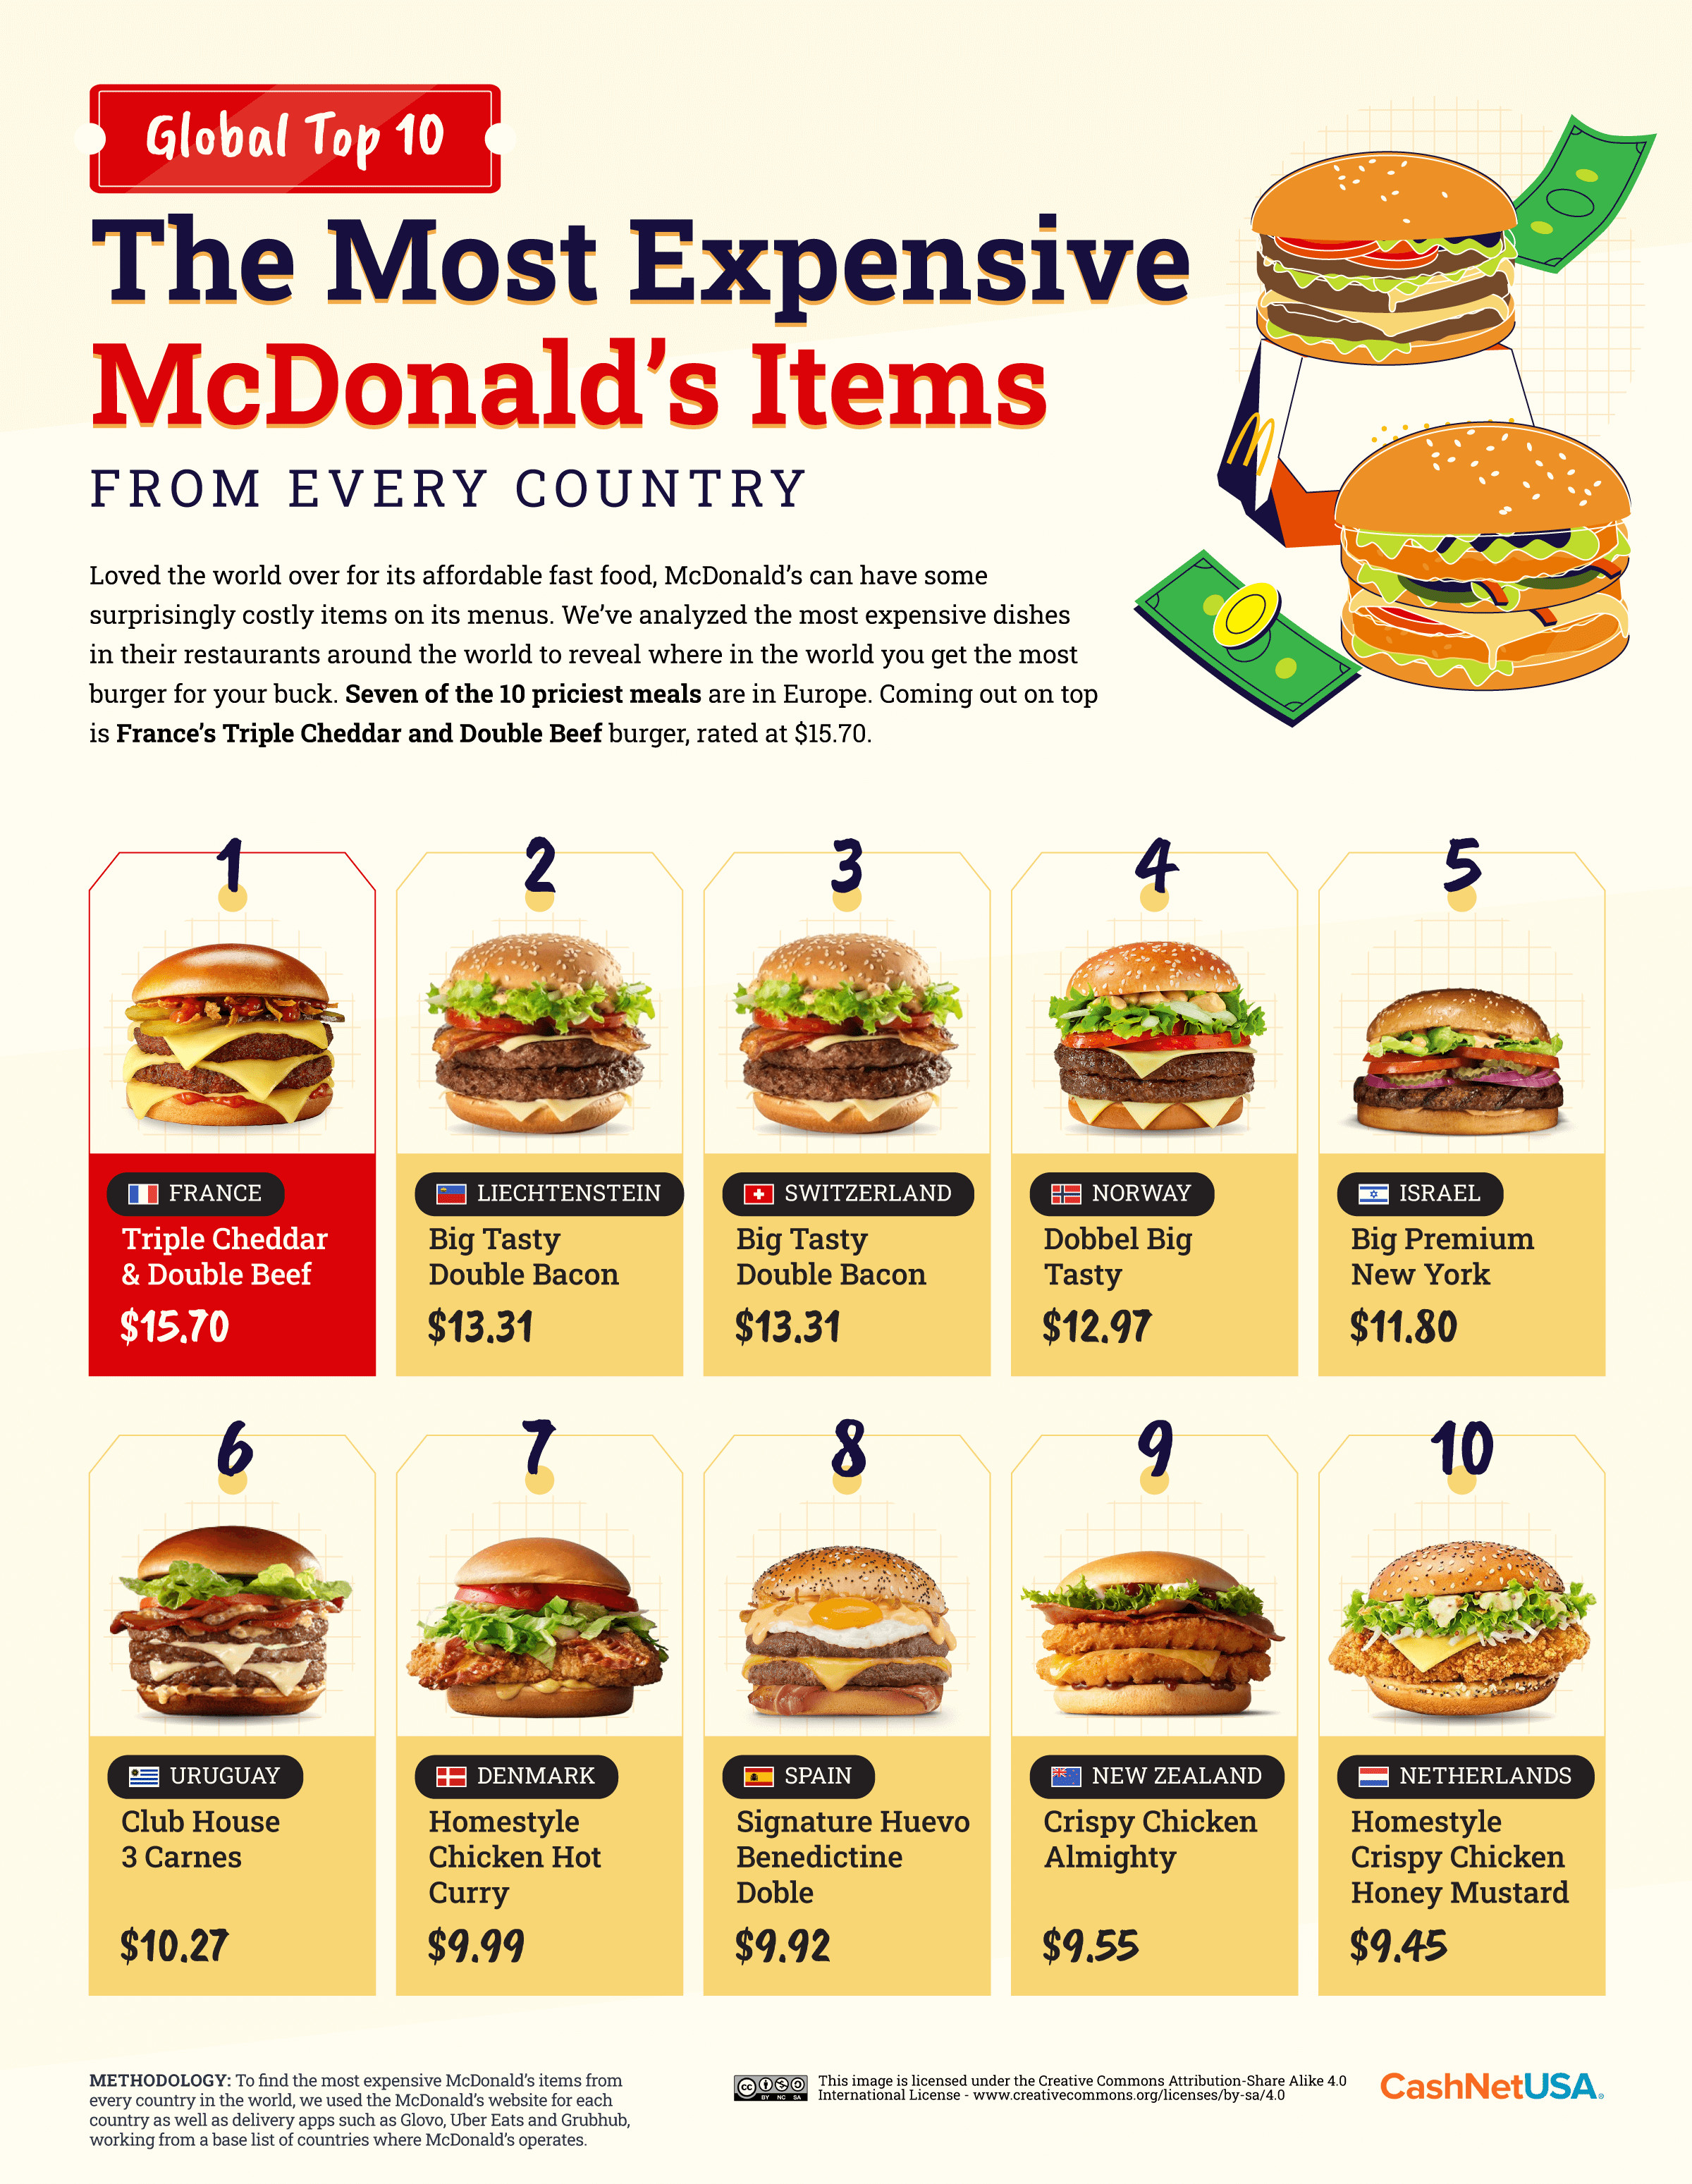 Here's How Much a Big Mac Costs Around the World